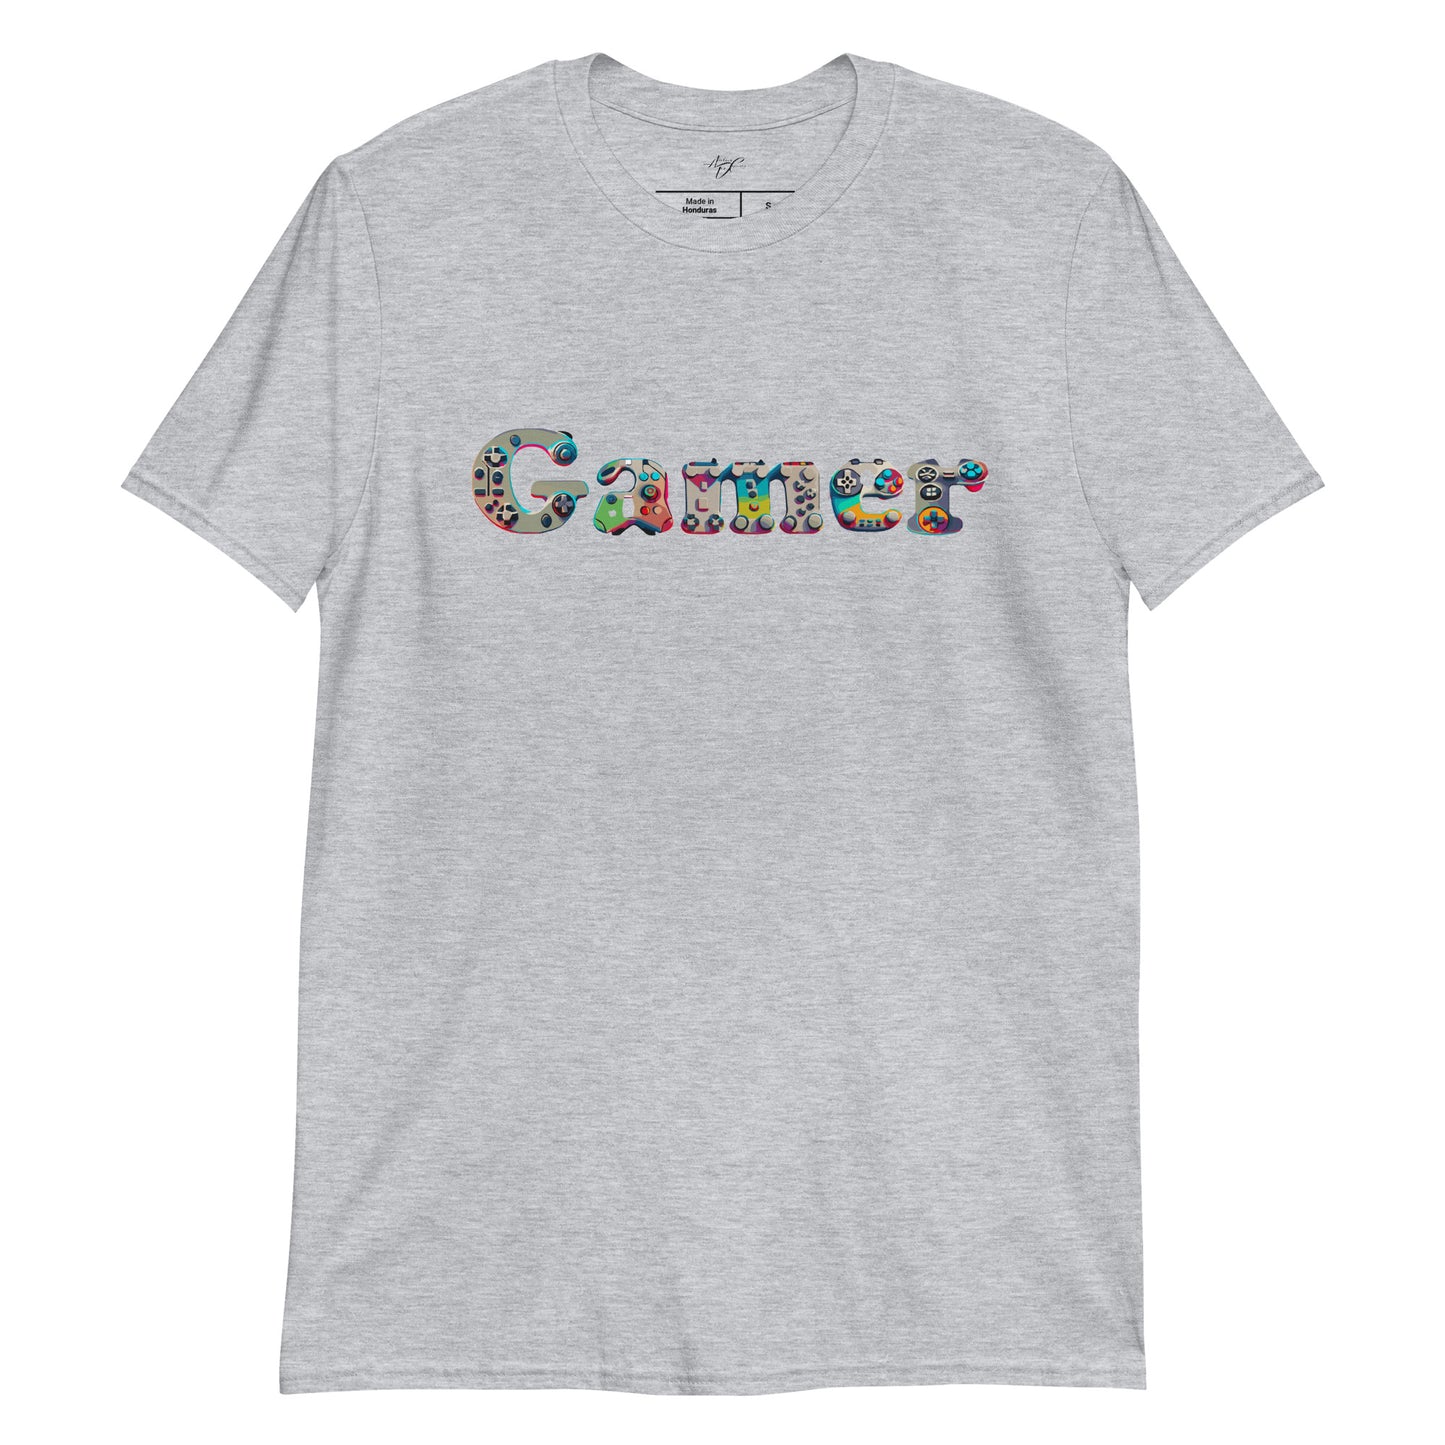 Exclusive 'Gamer' Motif Softstyle T-Shirt by Atelier Des Caprices